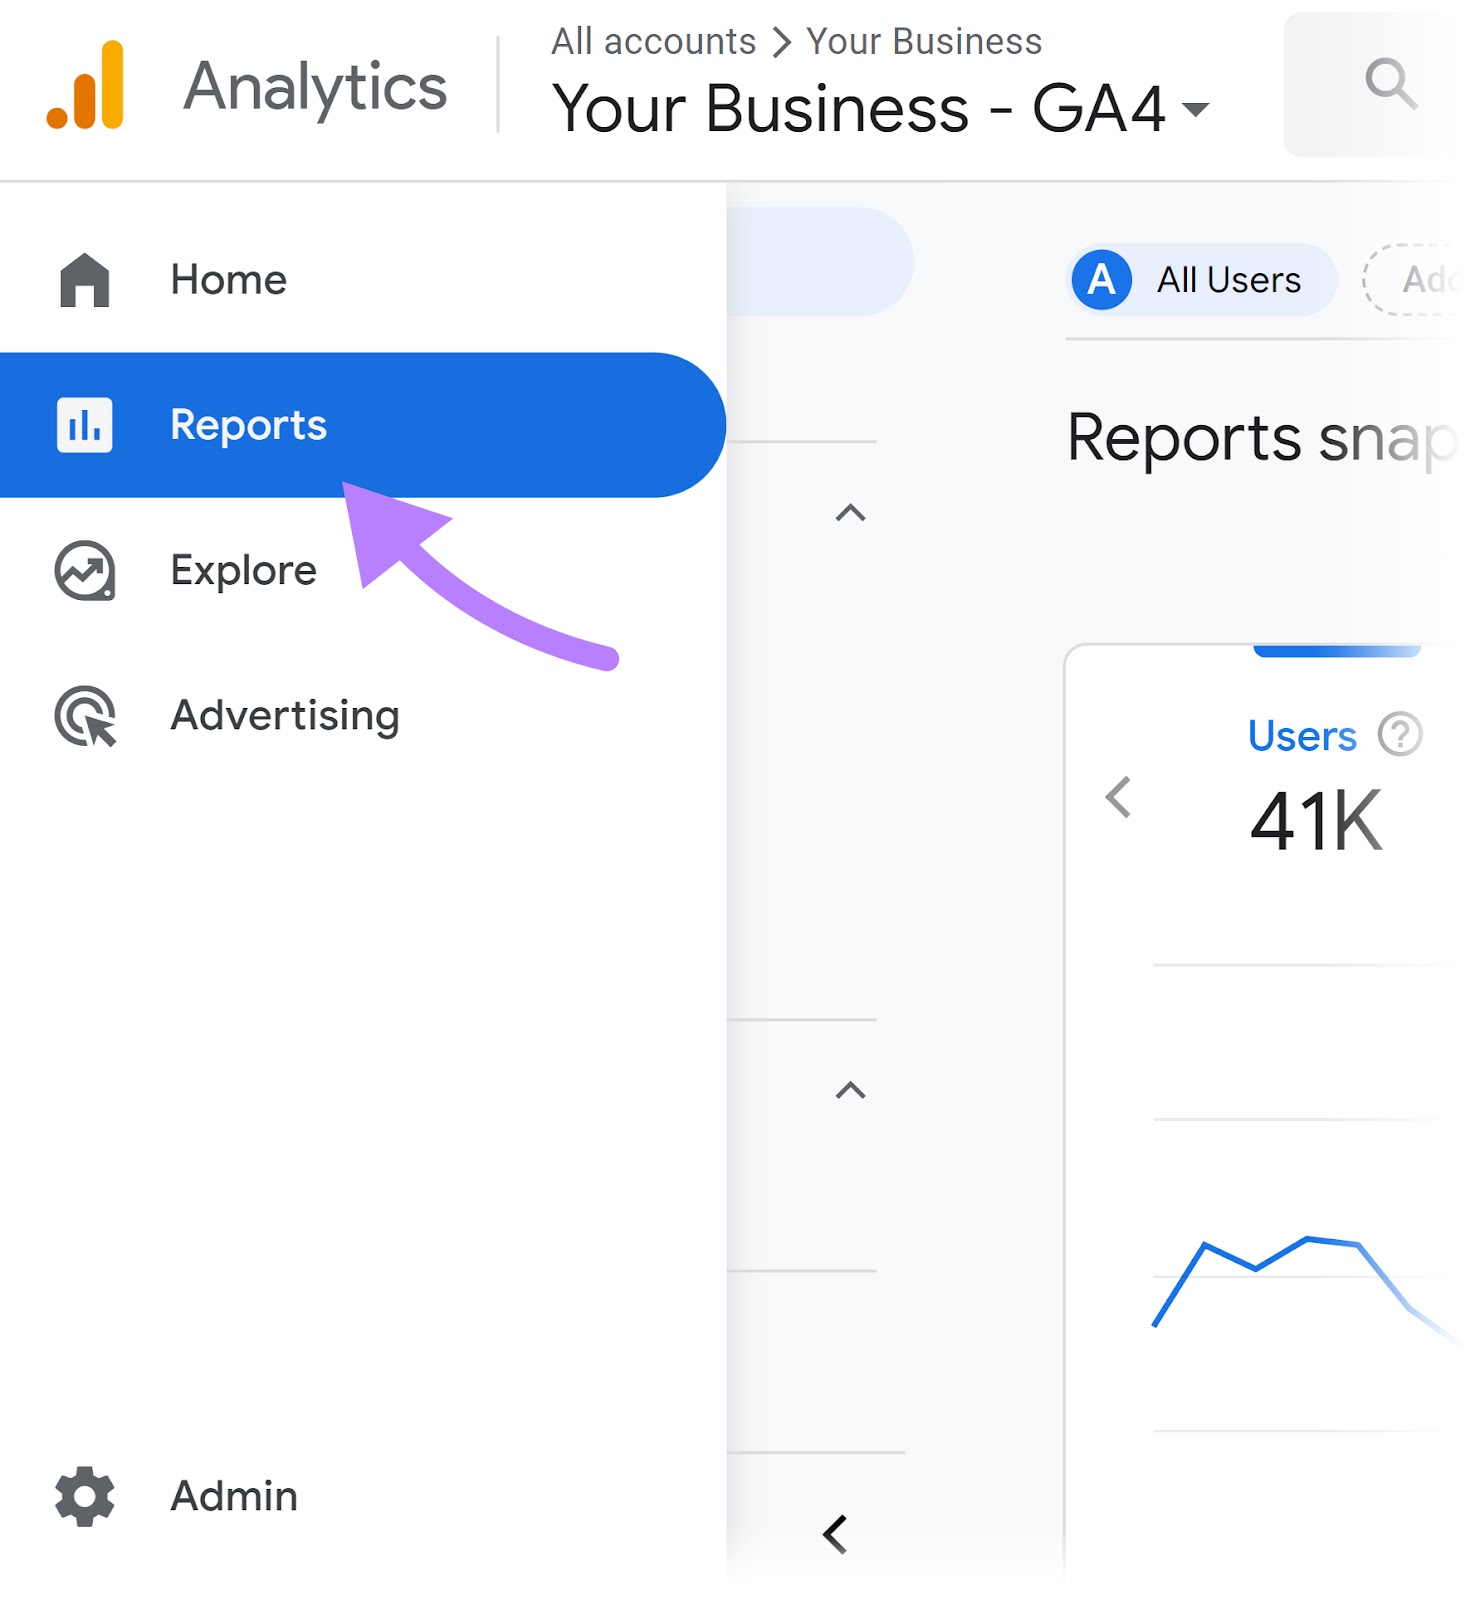 "Reports" selected in the GA4 account’s “Admin” area